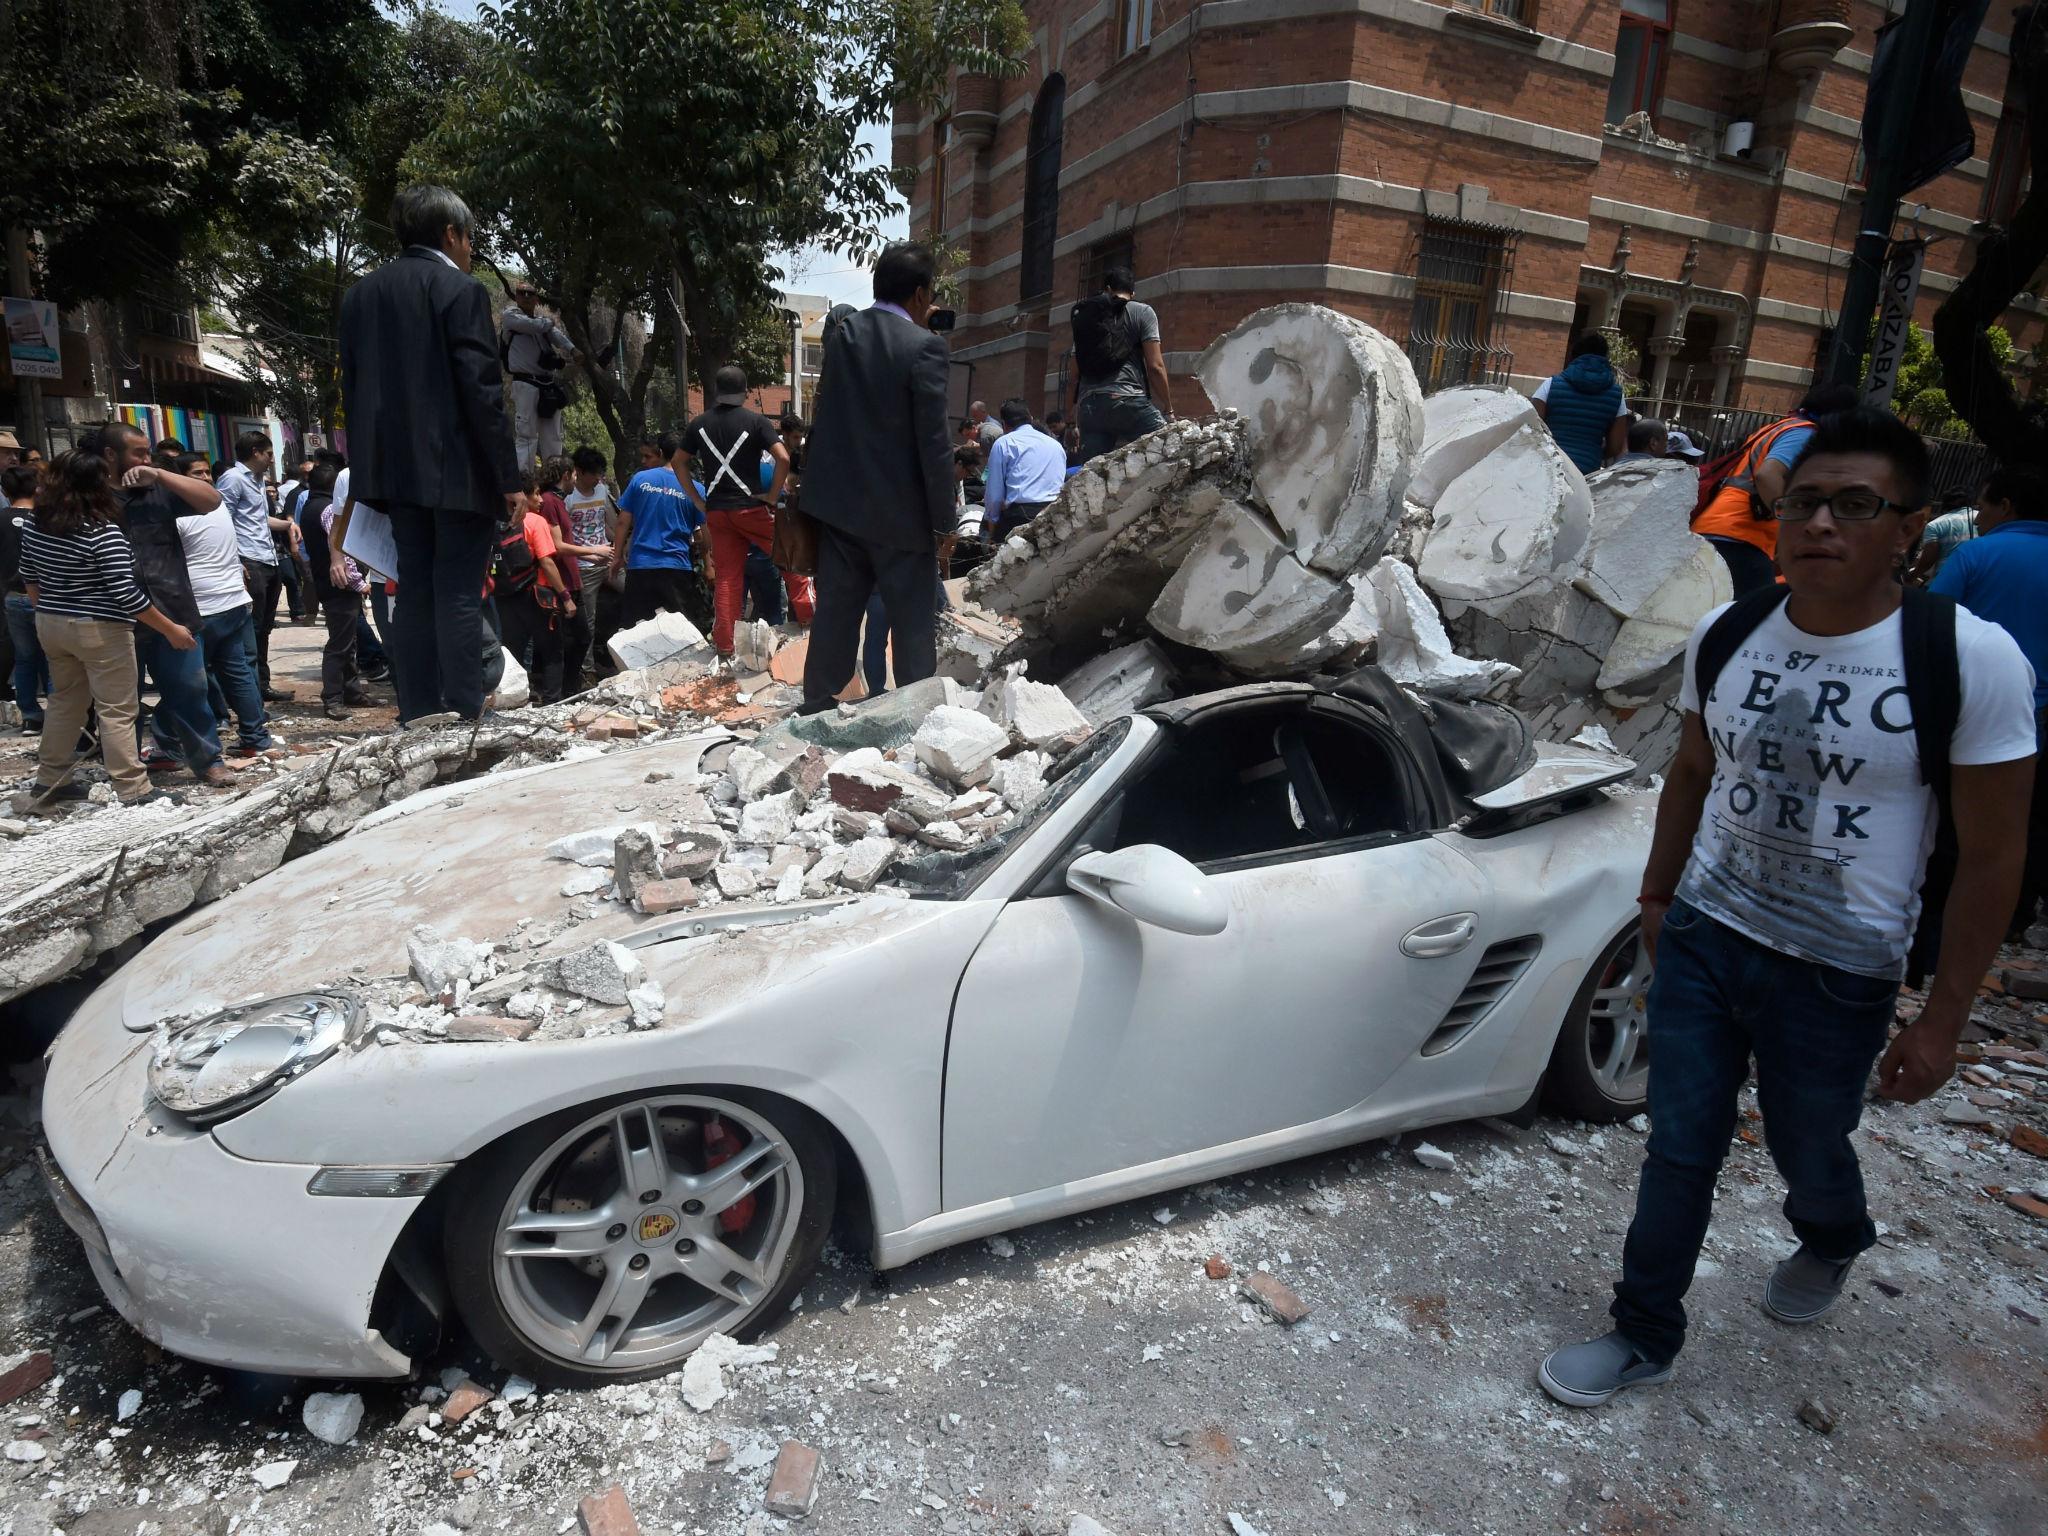 A man stands next to a car crashed by debris from a damaged building after a quake rattled Mexico City on September 19, 2017